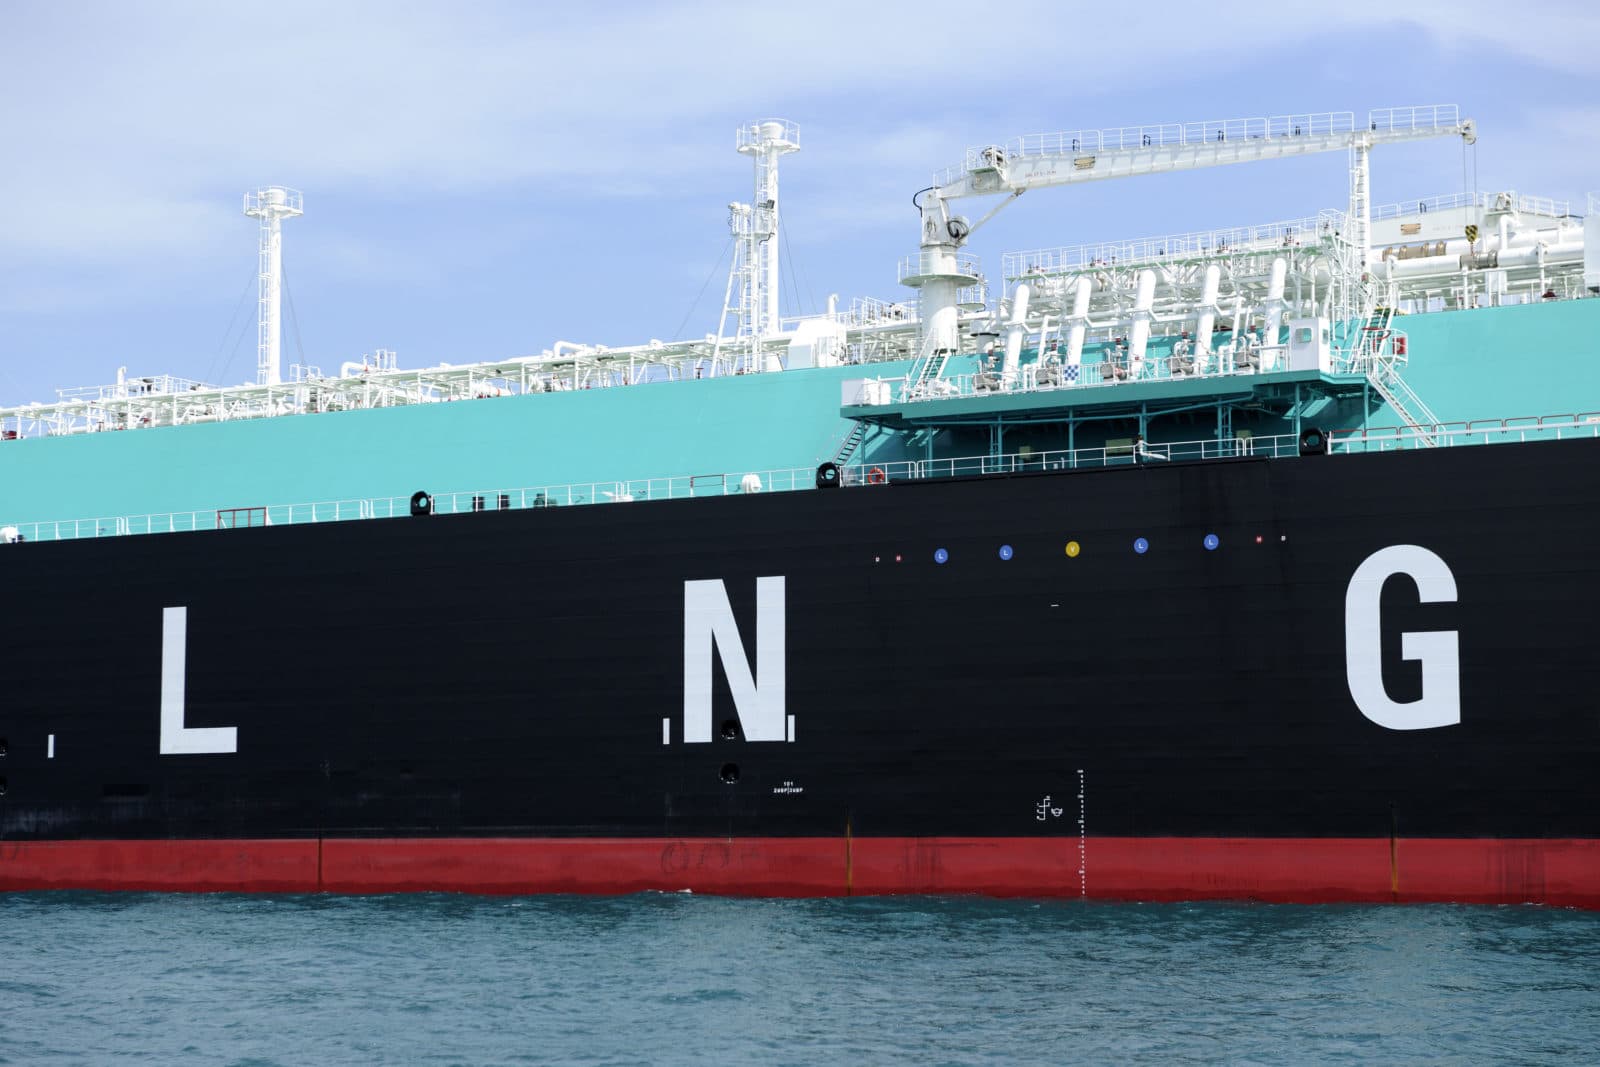 Govt. Resumes Spot Buying LNG to Meet High Demand